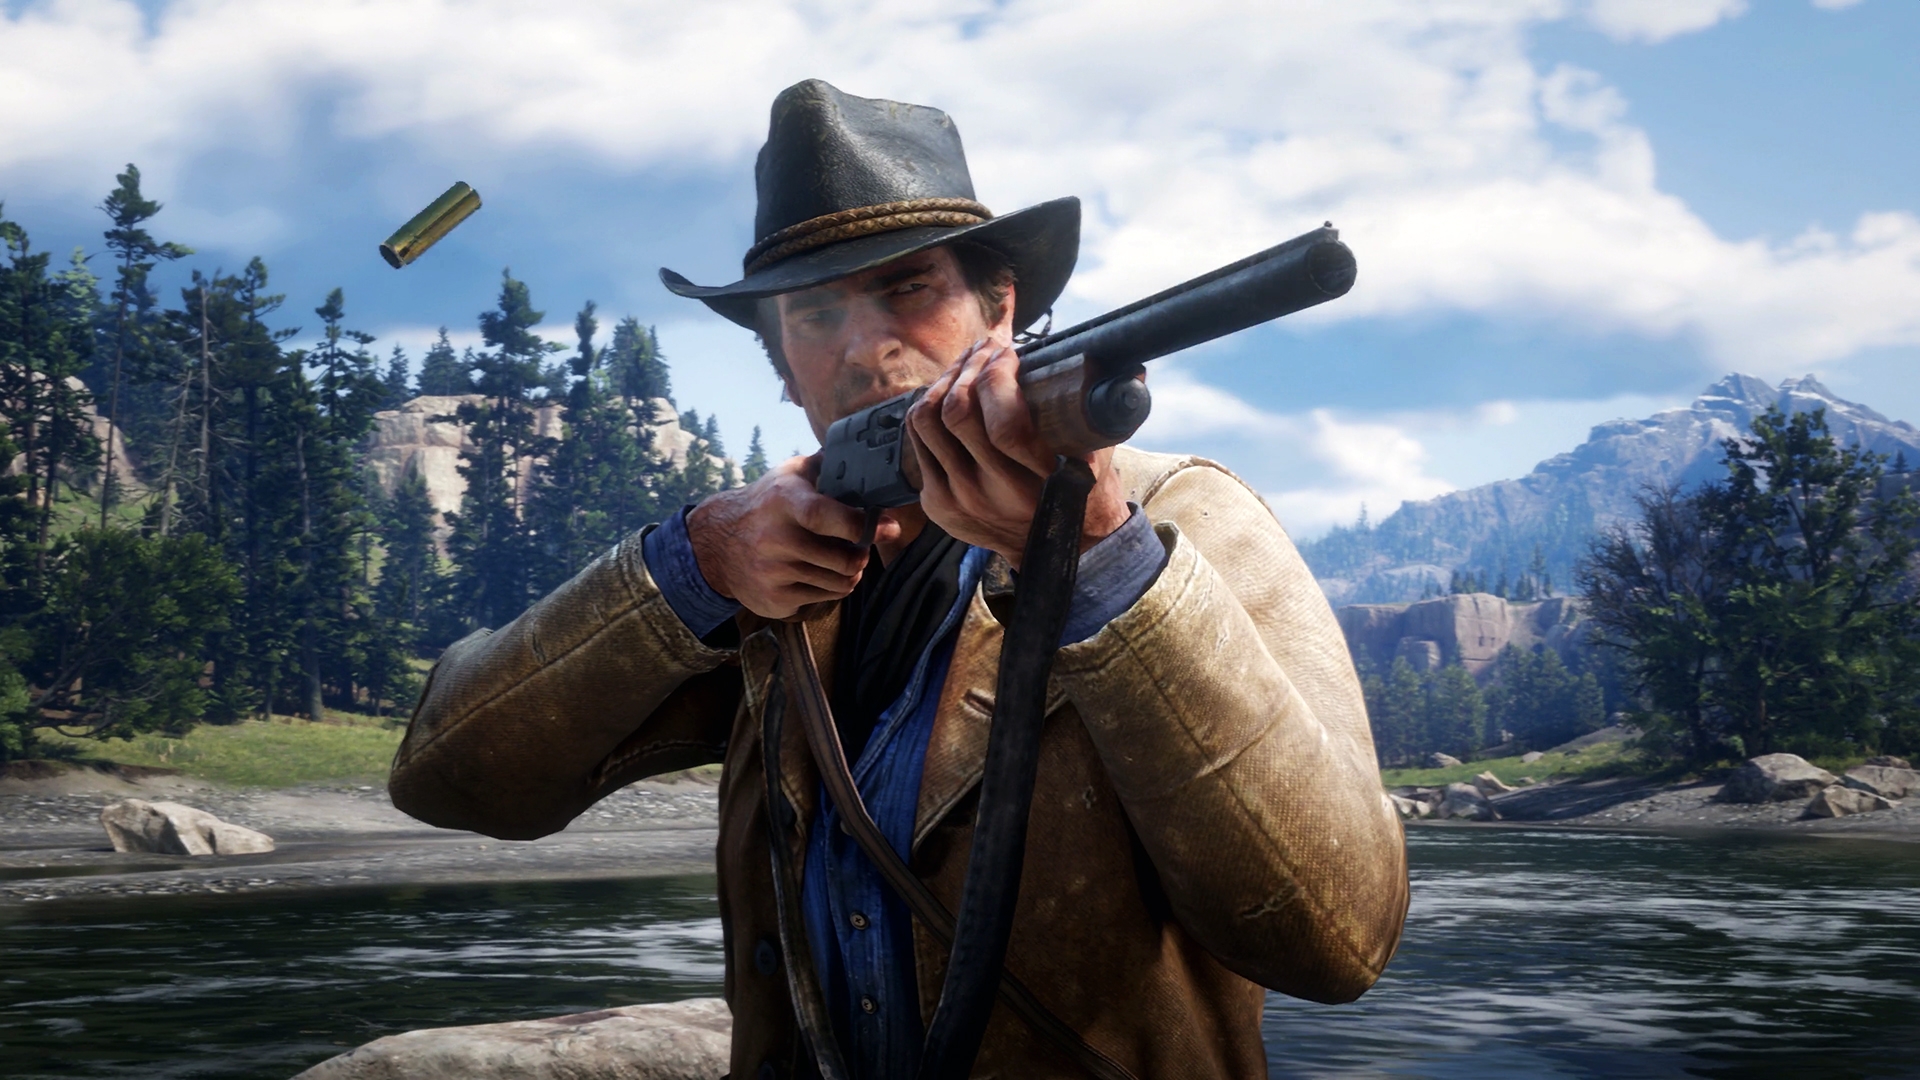 Free photo The man with the shotgun from red dead redemption 2.